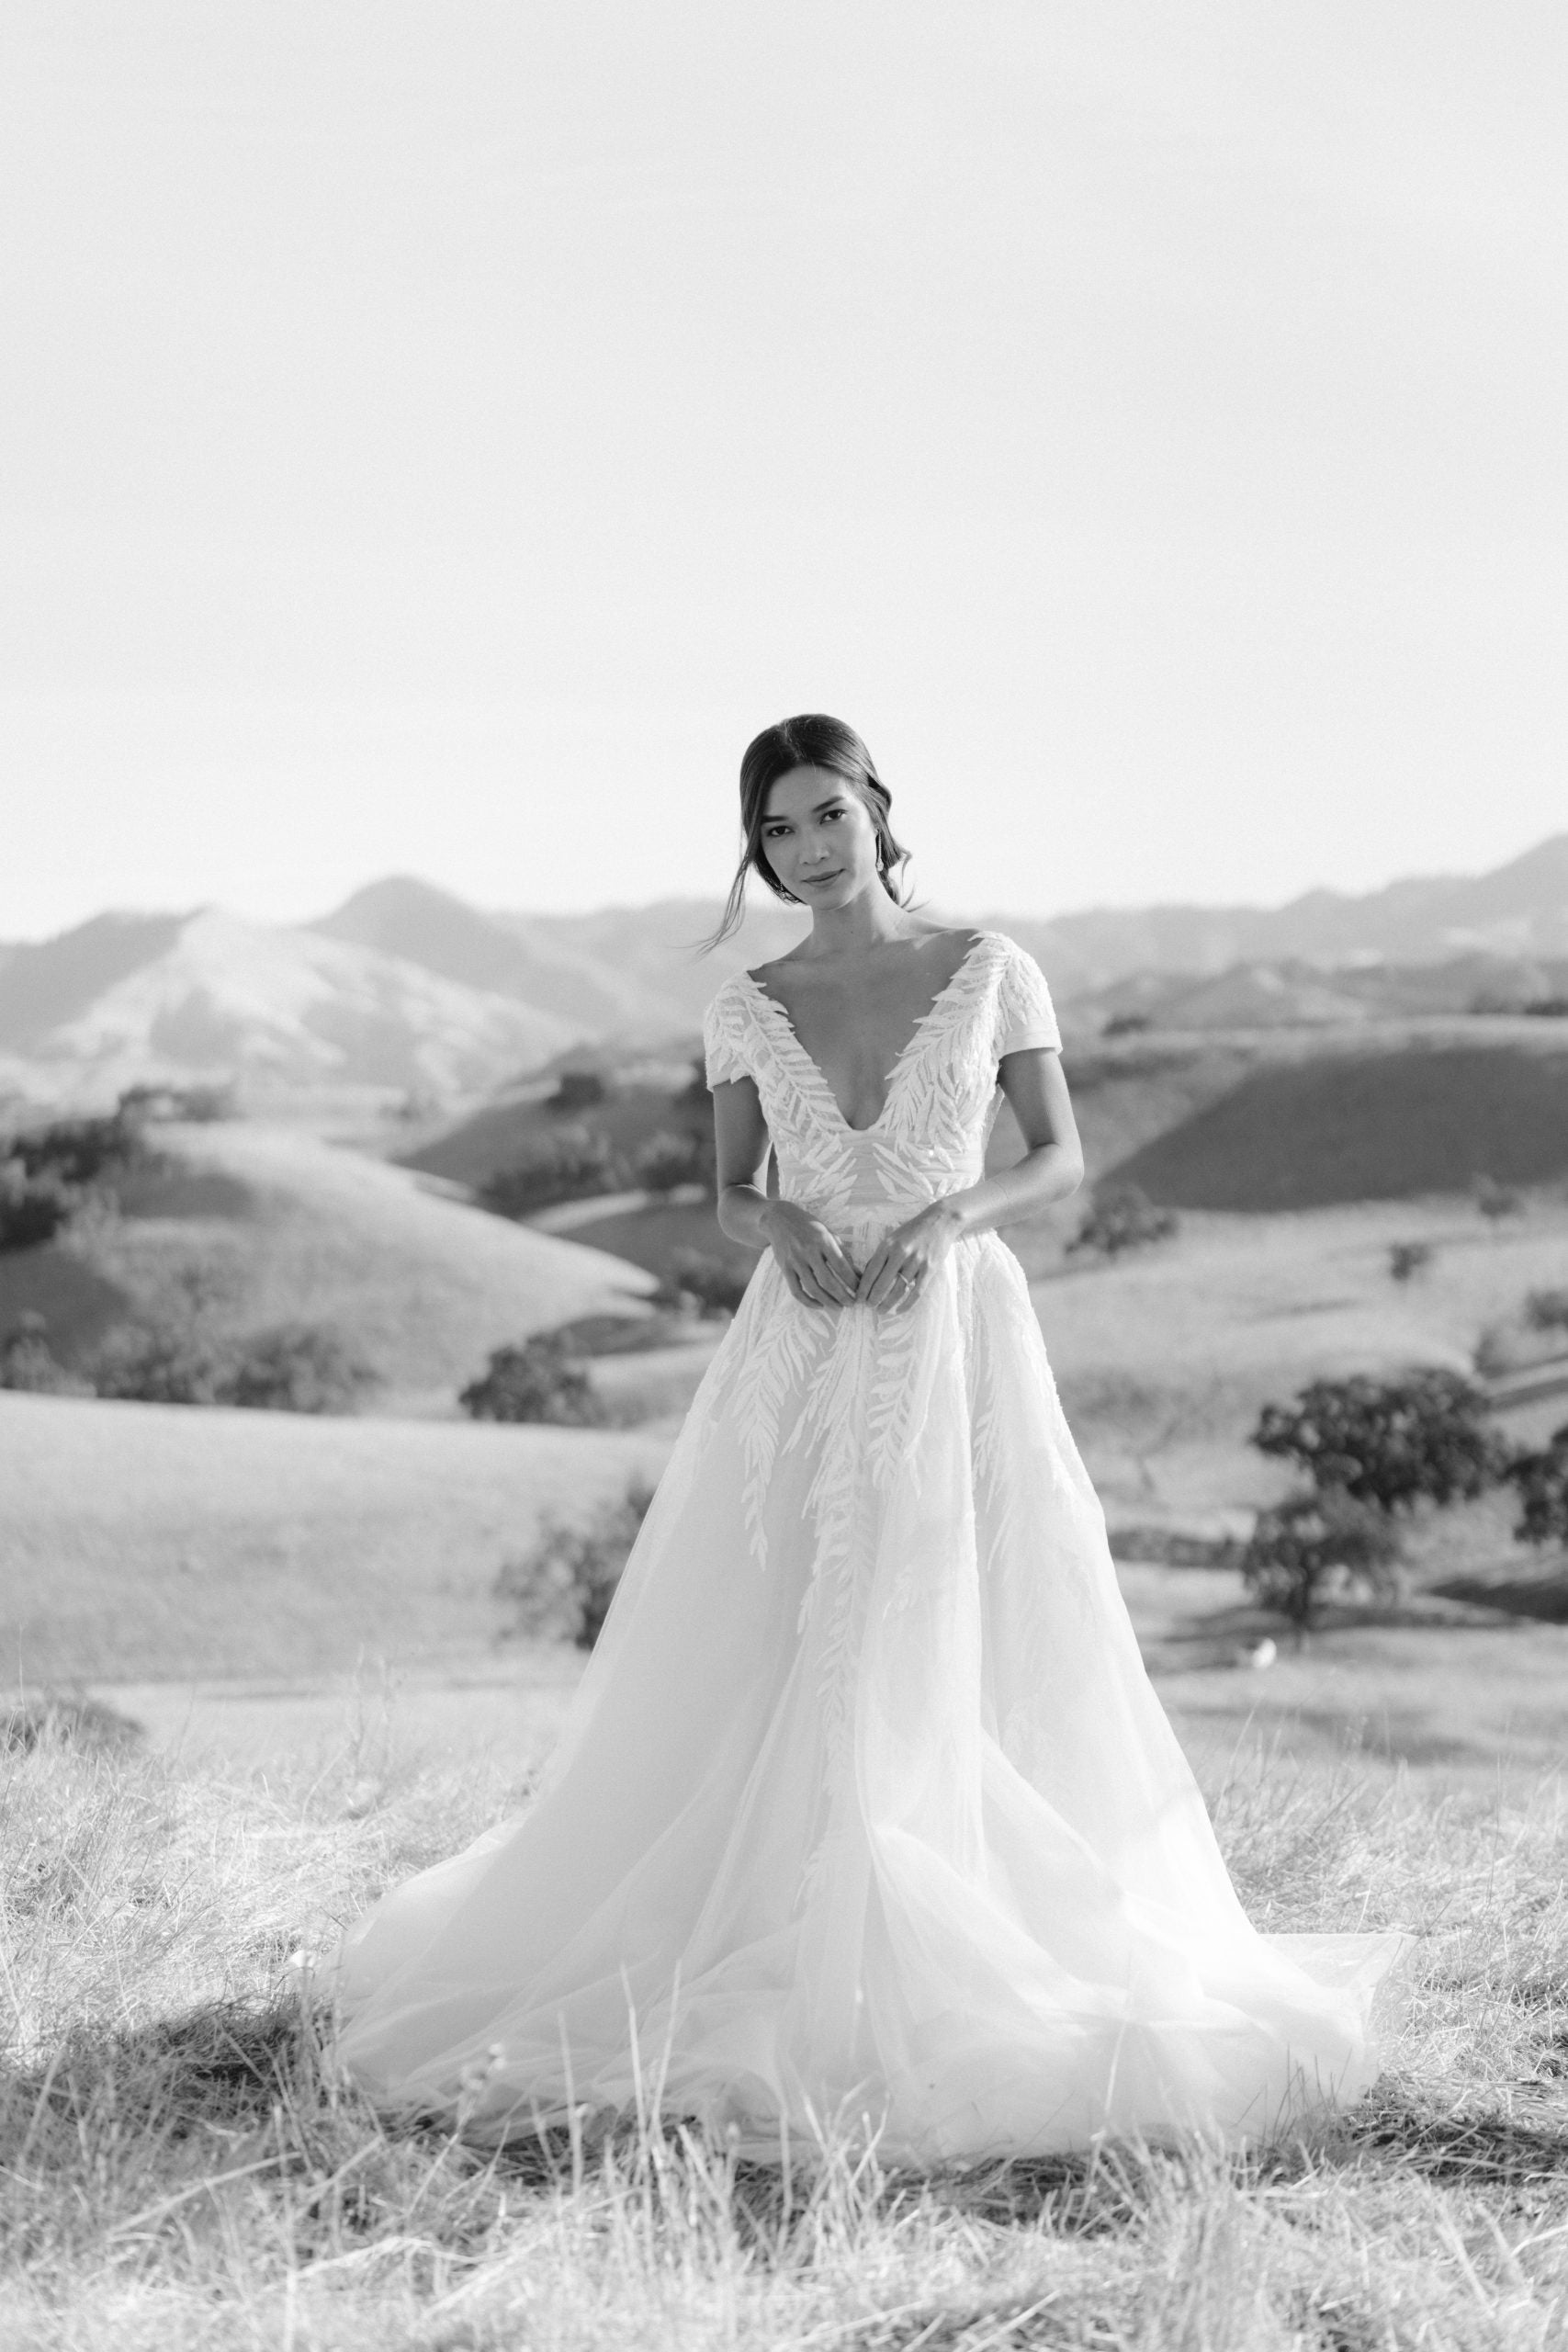 Finding the right wedding dress shape for your body